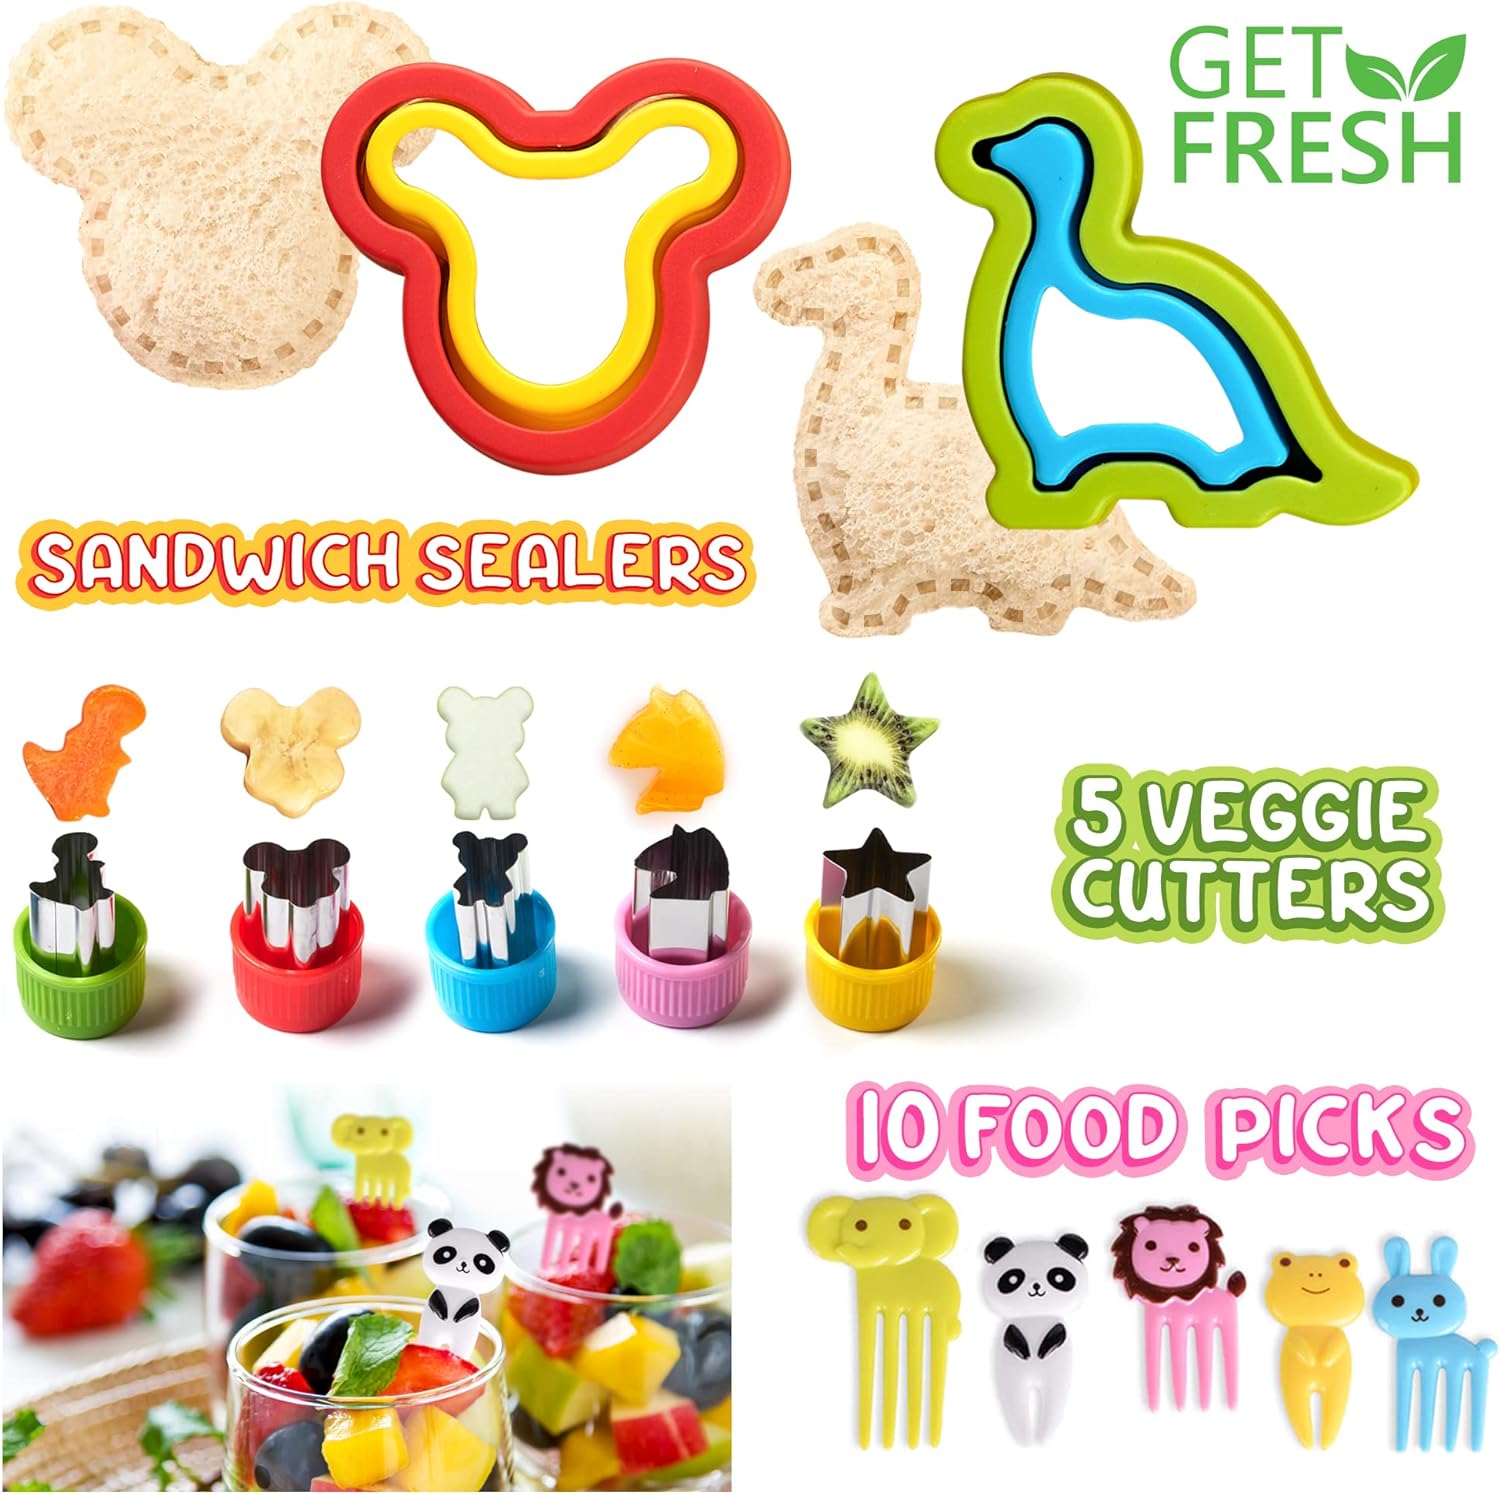 17-pcs Stainless Steel Sandwich Sealers and Veggie Cutters for Kids